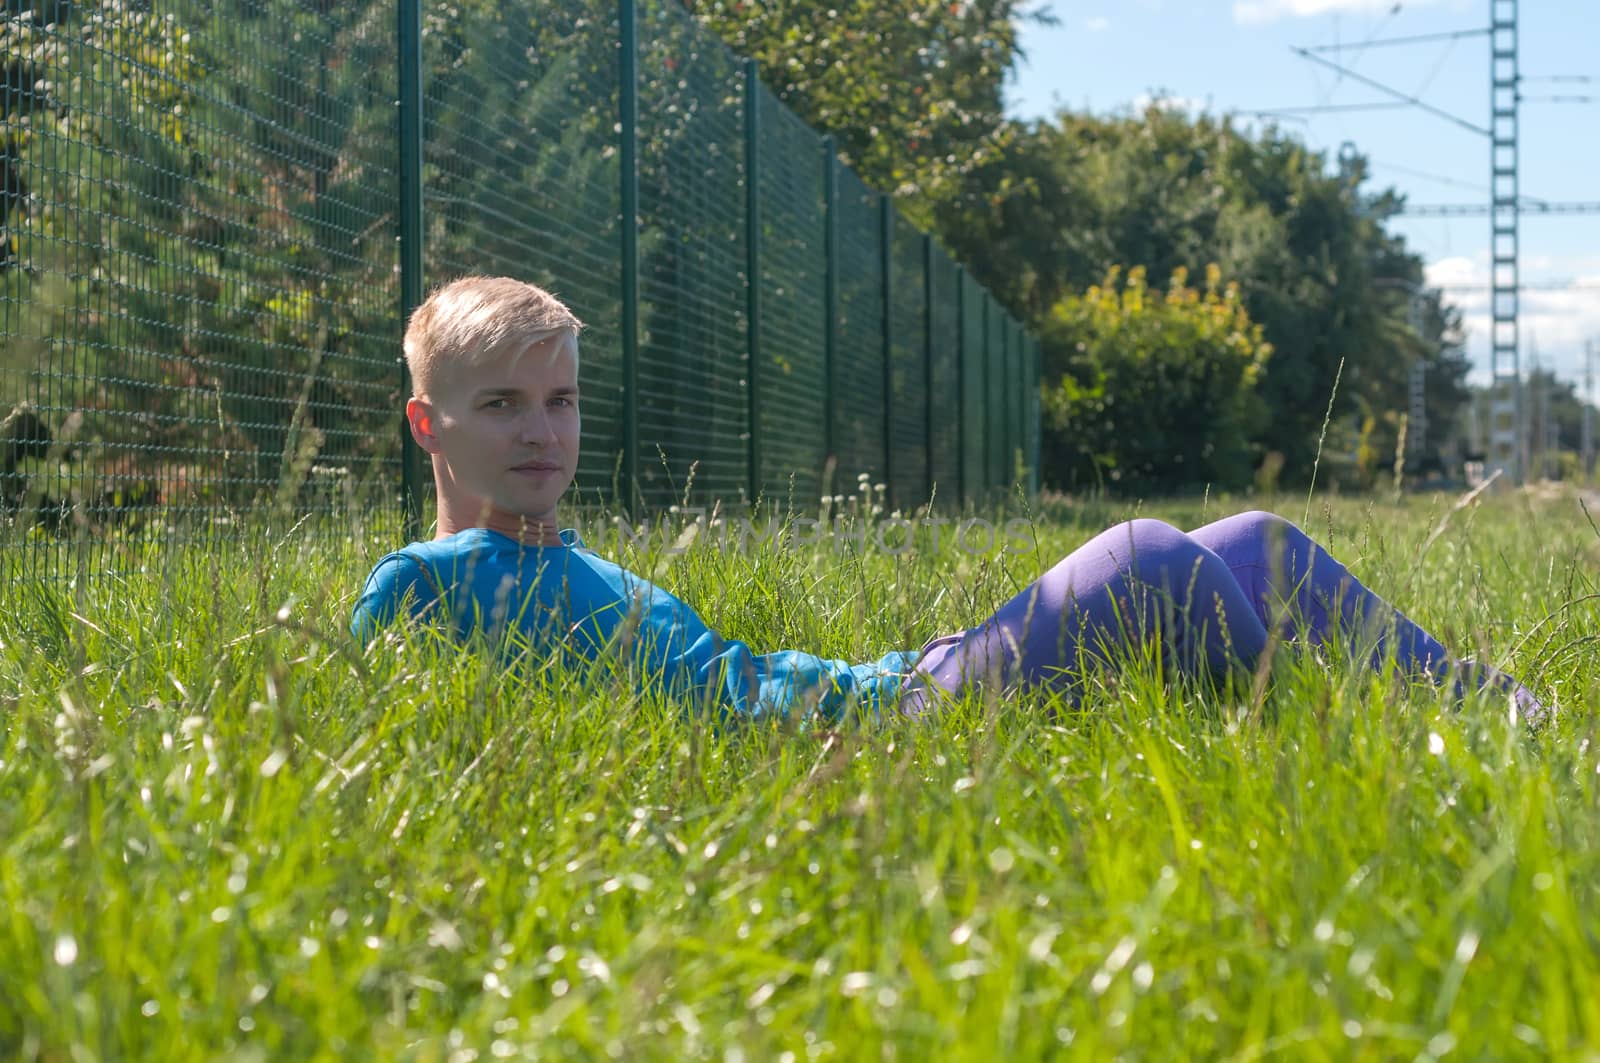 Young an in blue t-shirt lying in a grass